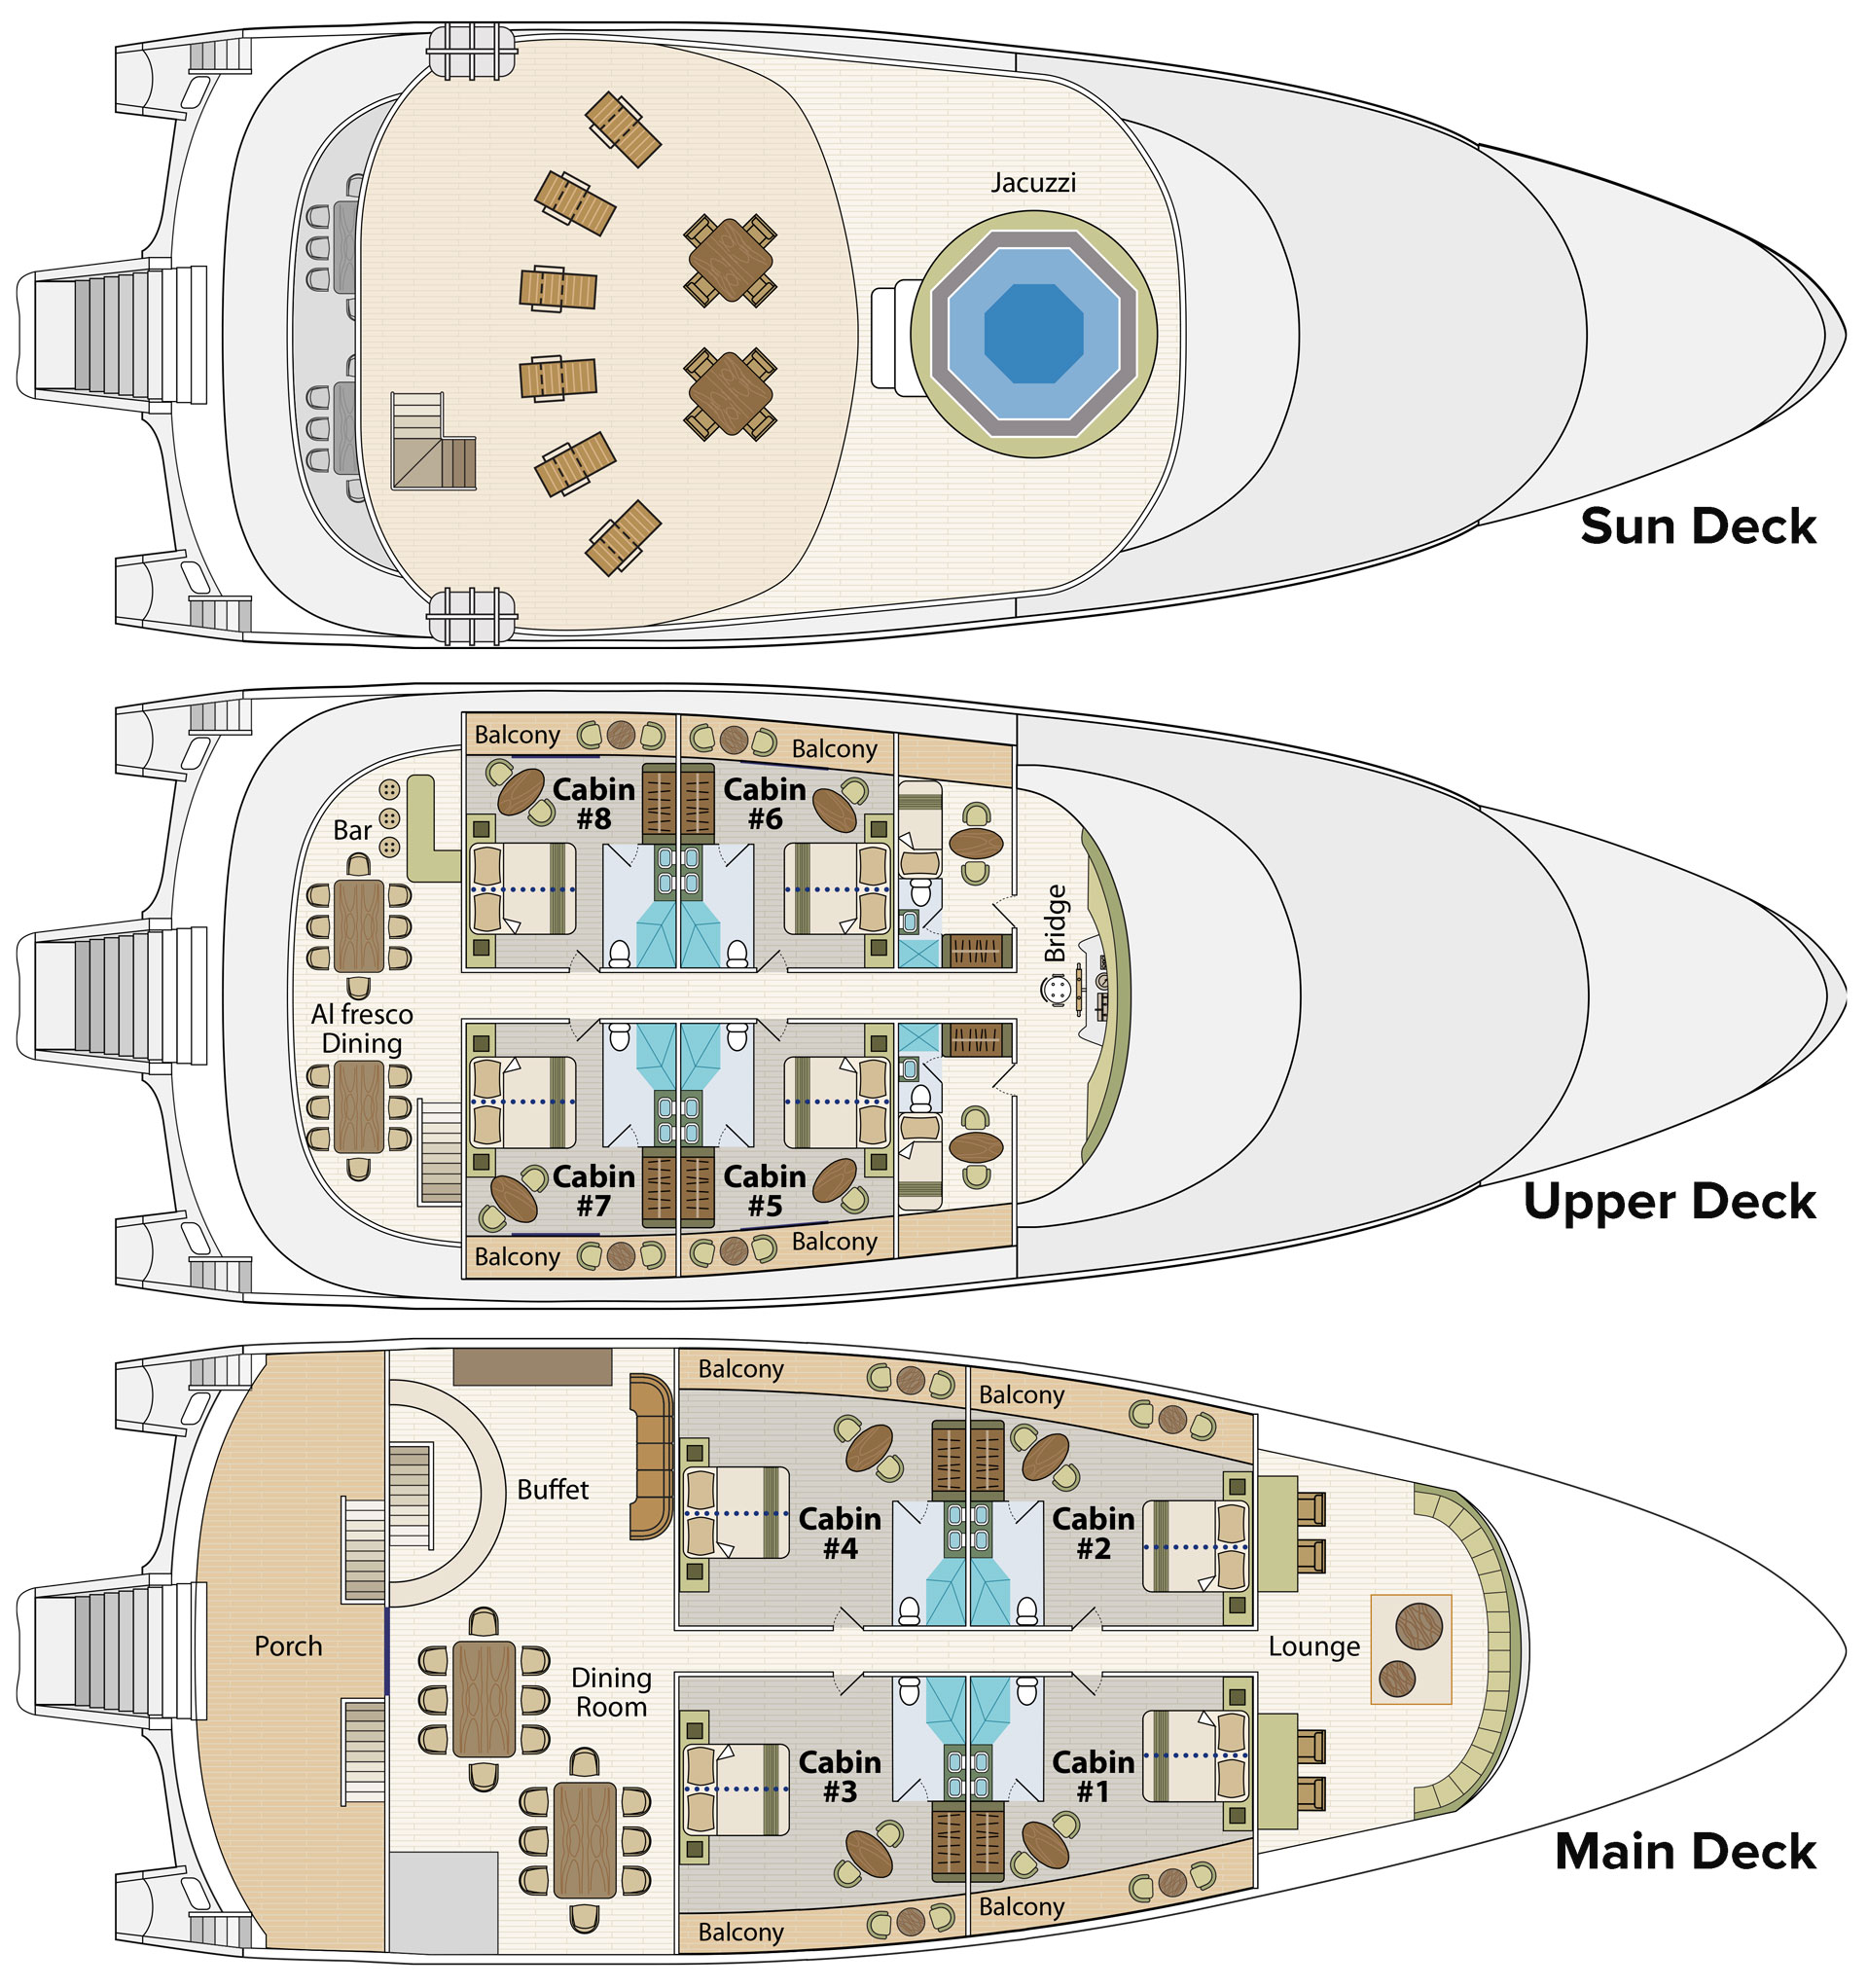 Camila trimaran Galapagos ship deck plan showing the main, upper & sun decks with 8 total guest staterooms plus a lounge, bar, dining room & porch.